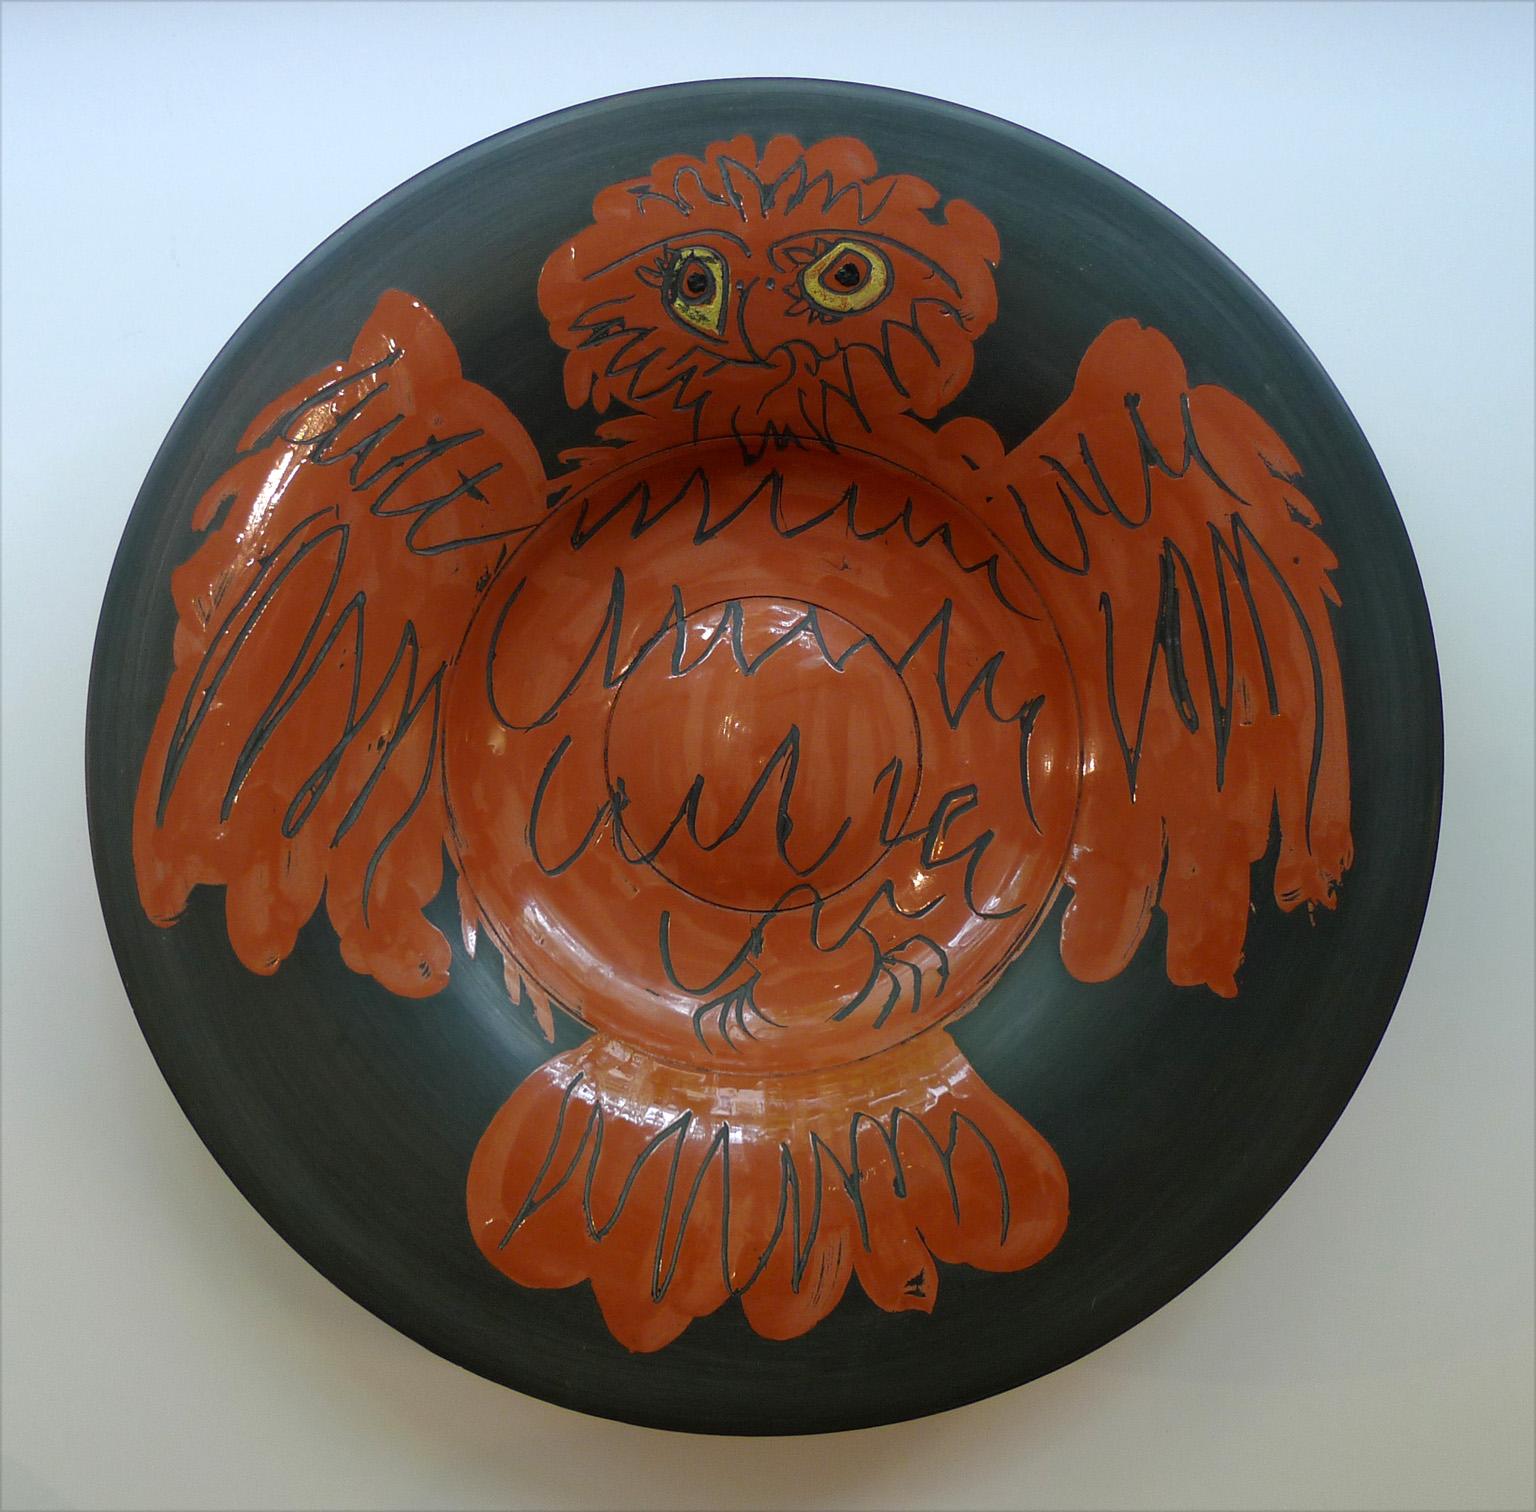 PABLO PICASSO (1881-1973)
Hibou rouge sur fond noir (A.R. 399)
stamped, marked and numbered 'Madoura Plein Feu / Edition Picasso / N 103 / Edition Picasso / 1/150 / Madoura' (underneath)
terracotta bowl, partially engraved, with colored engobe and